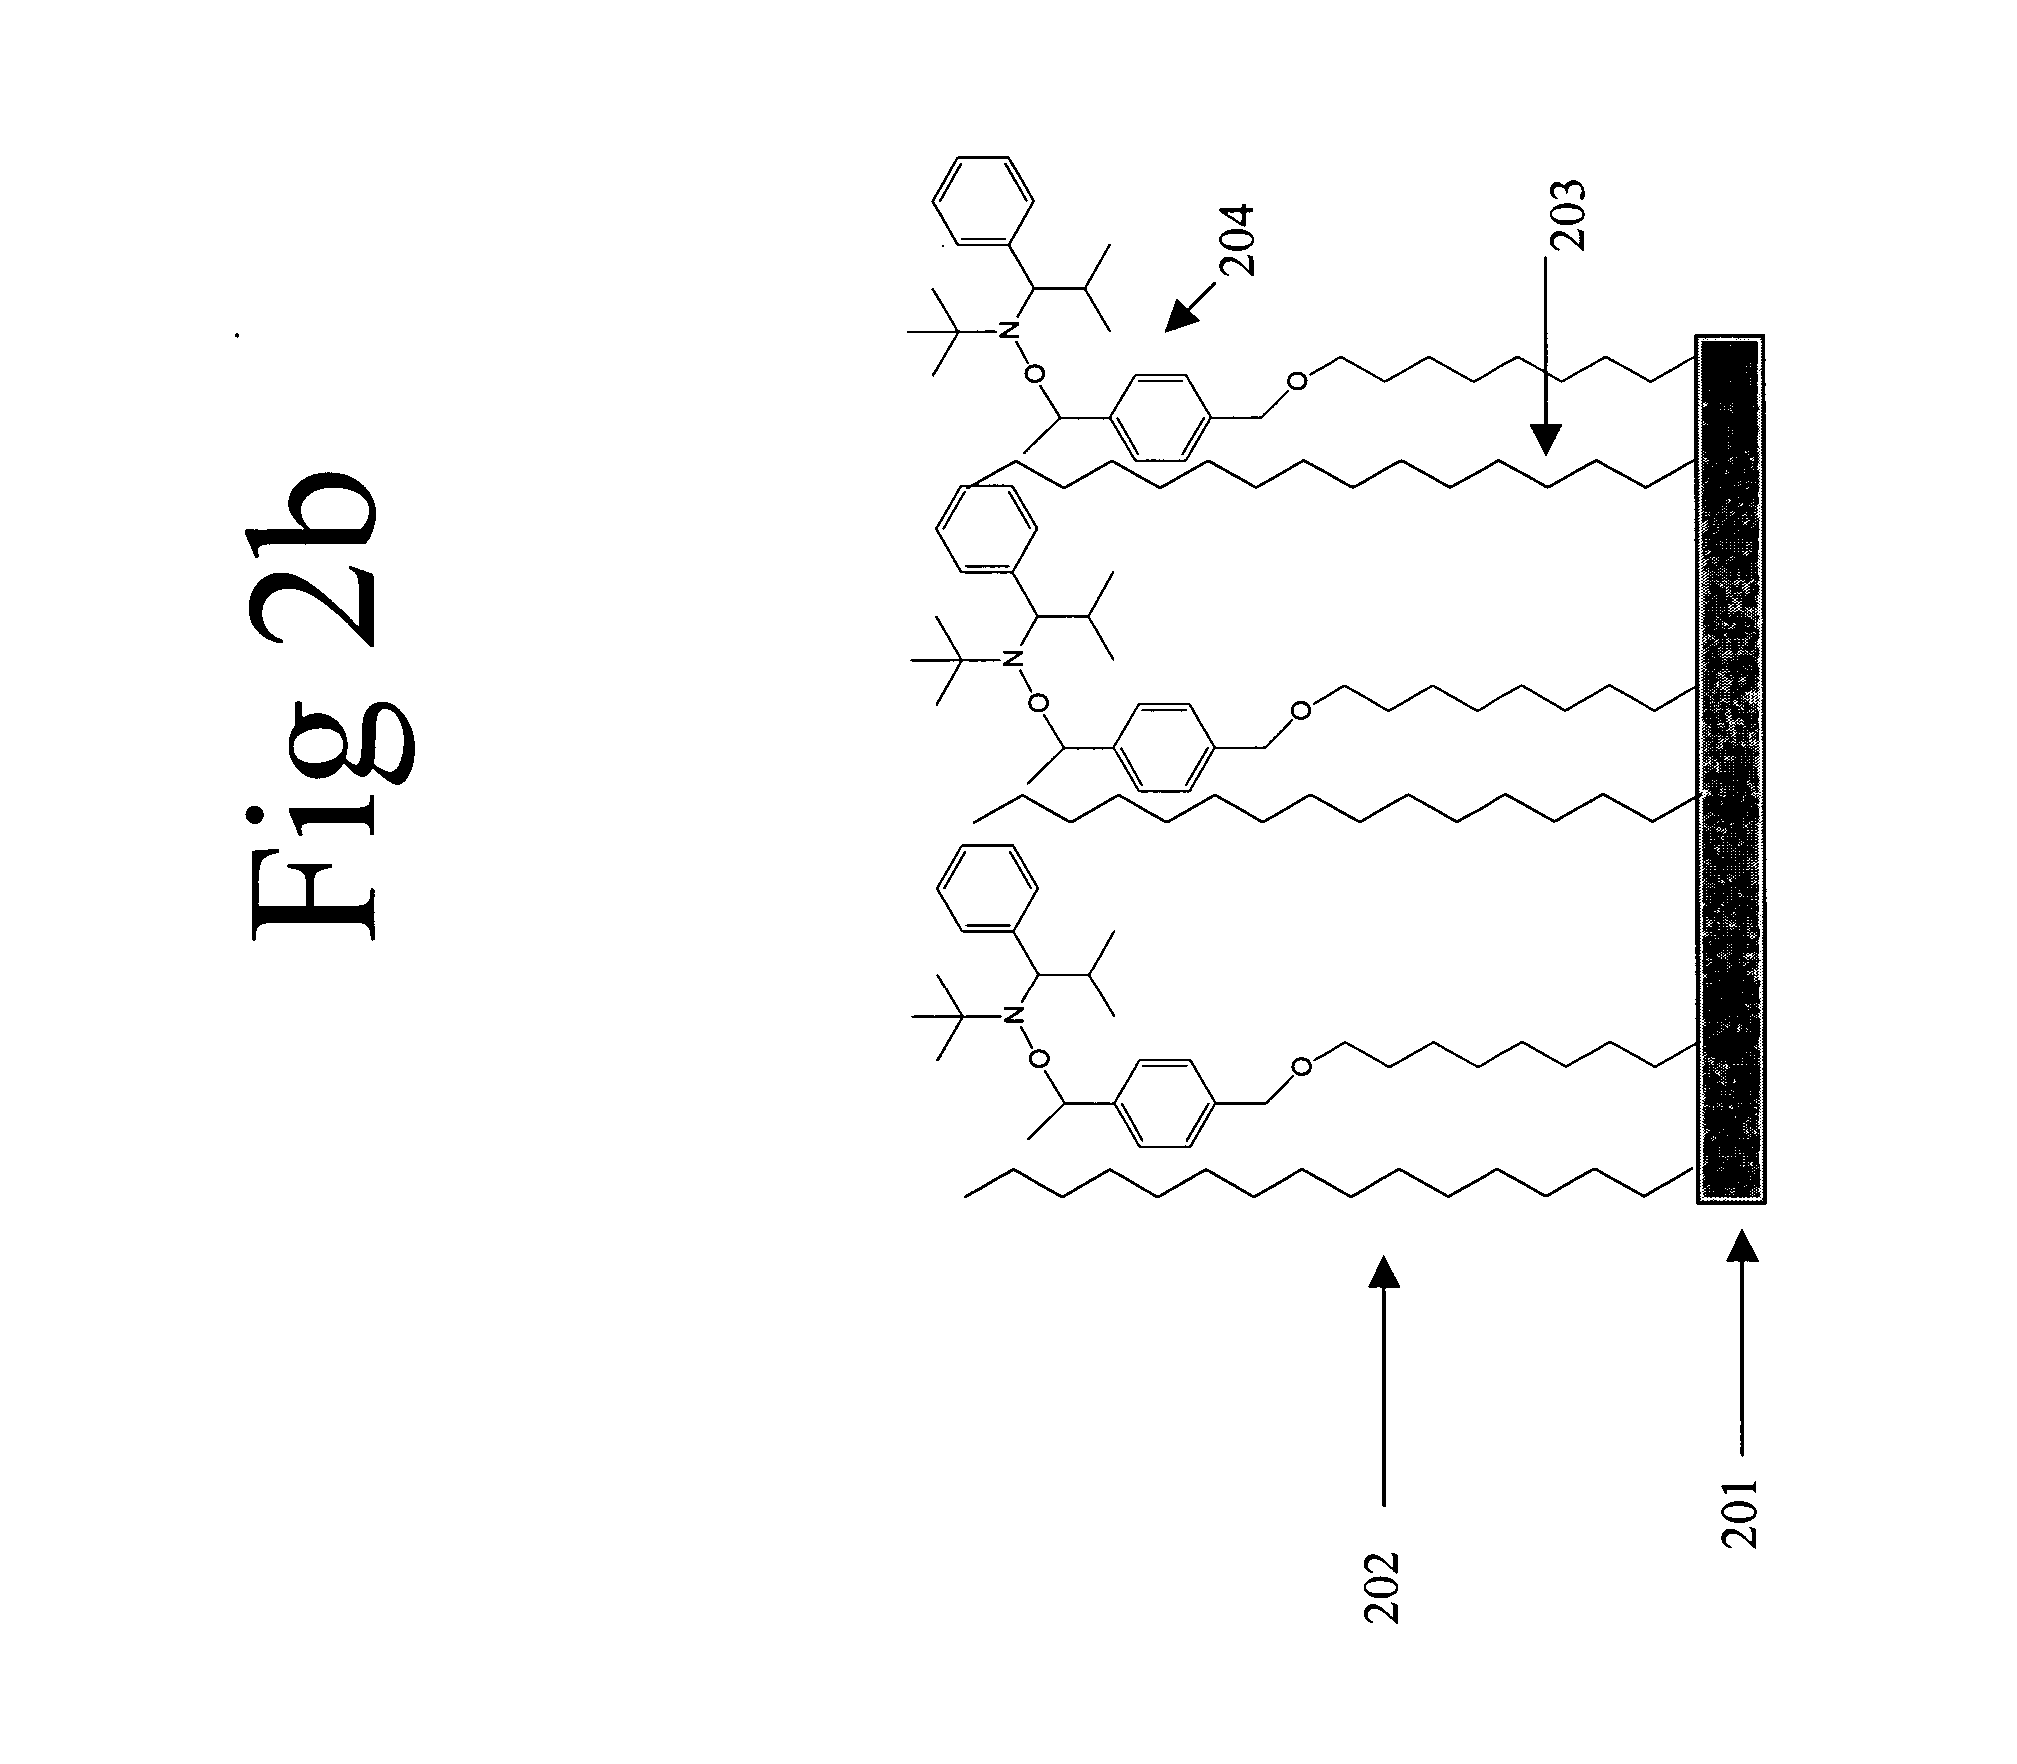 Materials and methods for creating imaging layers